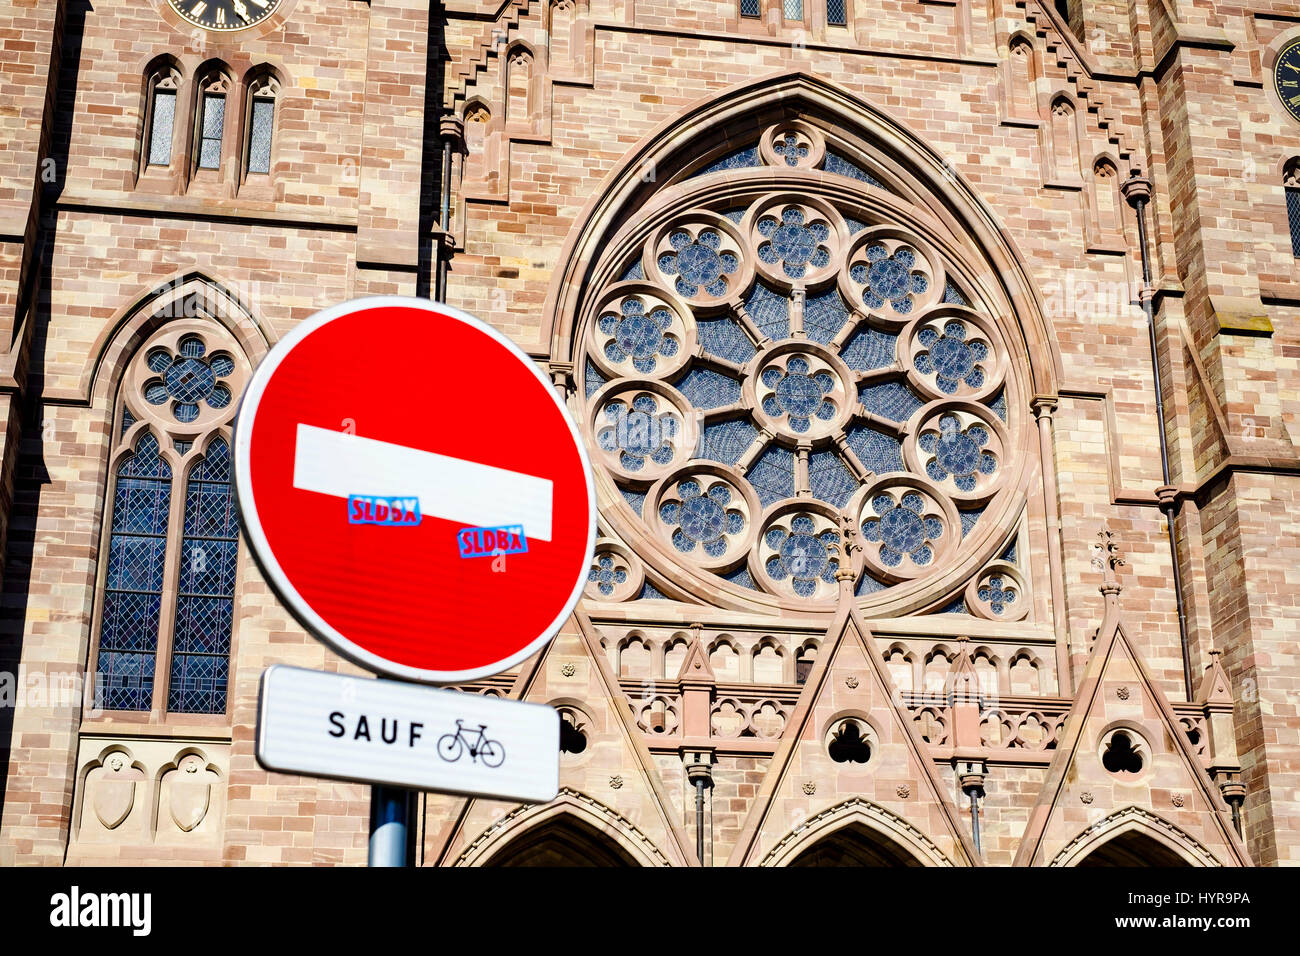 No entry sign except for cyclists and St Paul protestant church's rose window, Strasbourg, Alsace, France Stock Photo